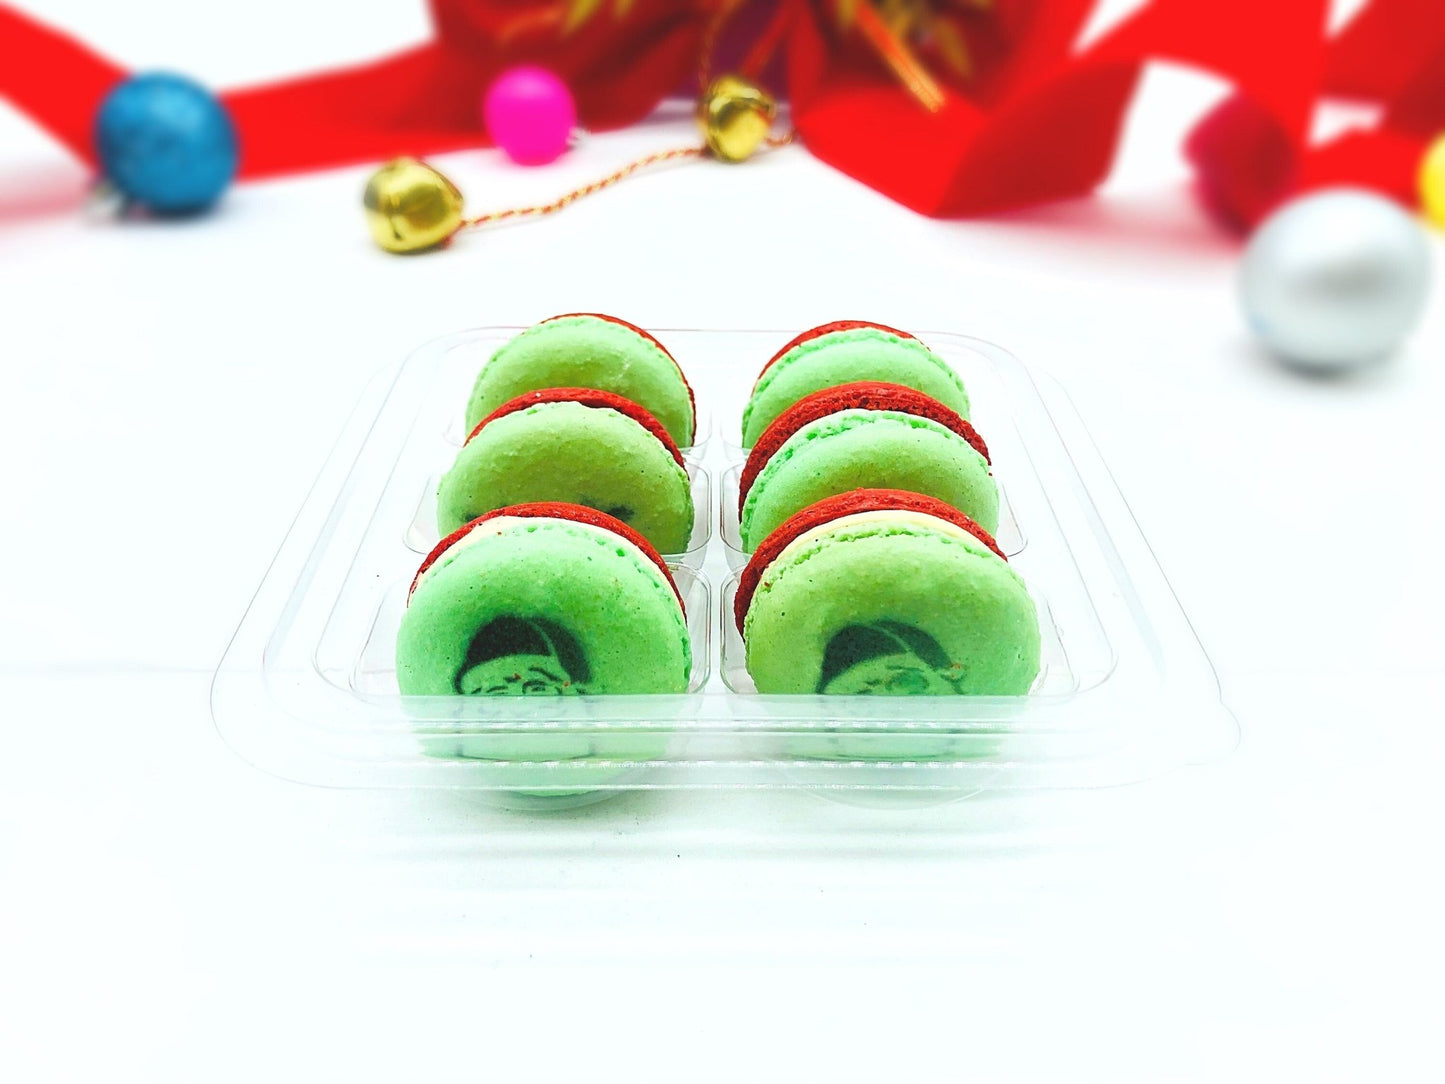 The Santa Clause Apple Caramel French Macarons - Macaron Centrale6 pack